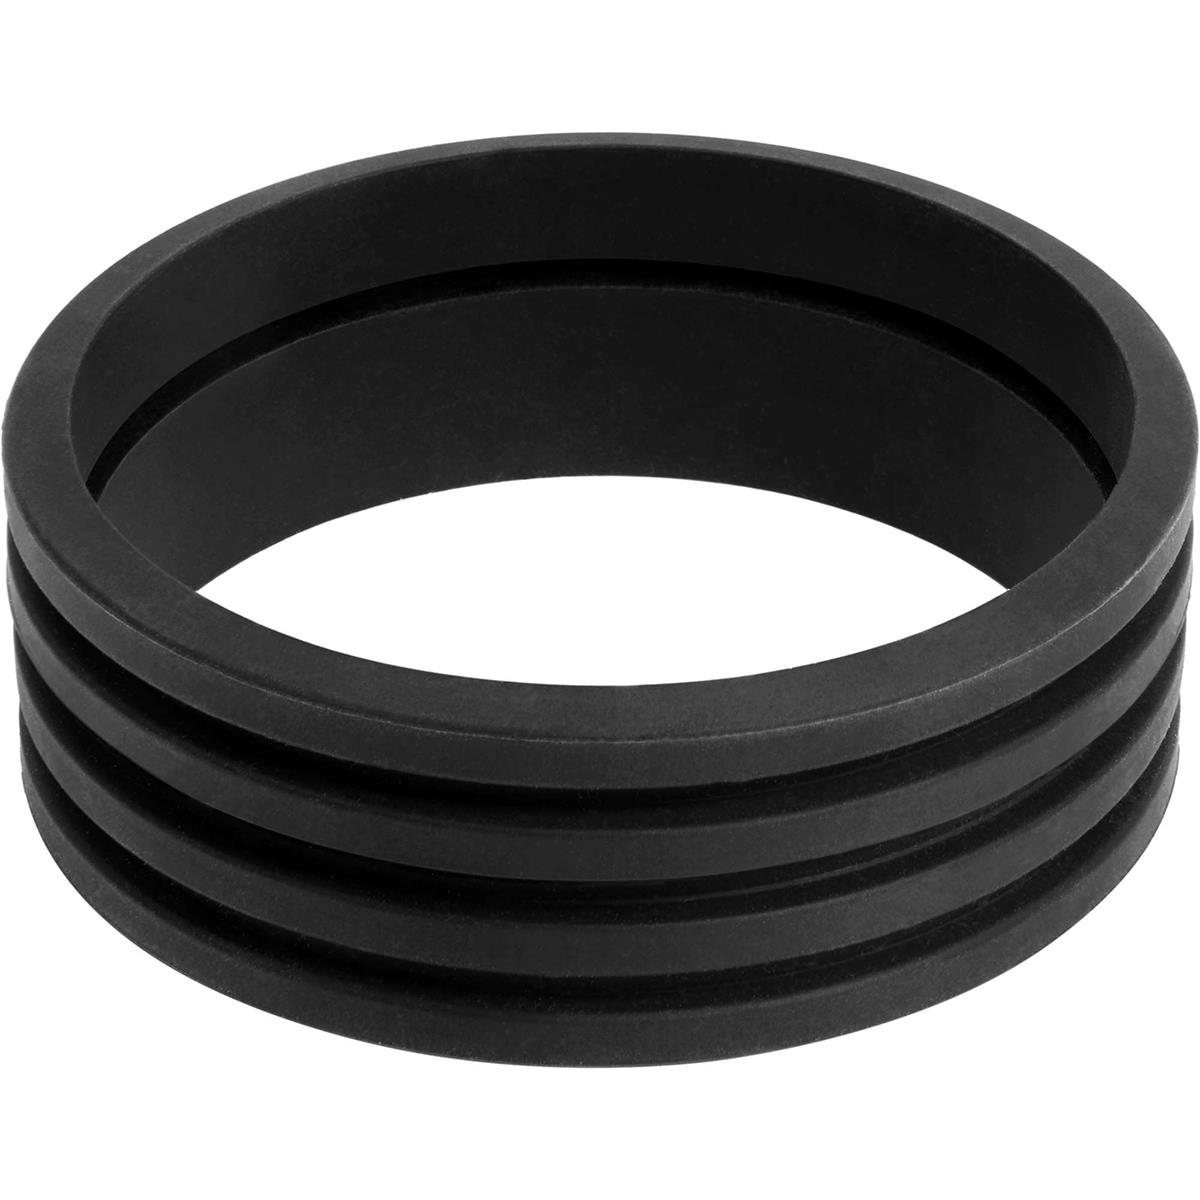 Image of Profoto Rubber Collar for Reflectors and RFi Speedrings